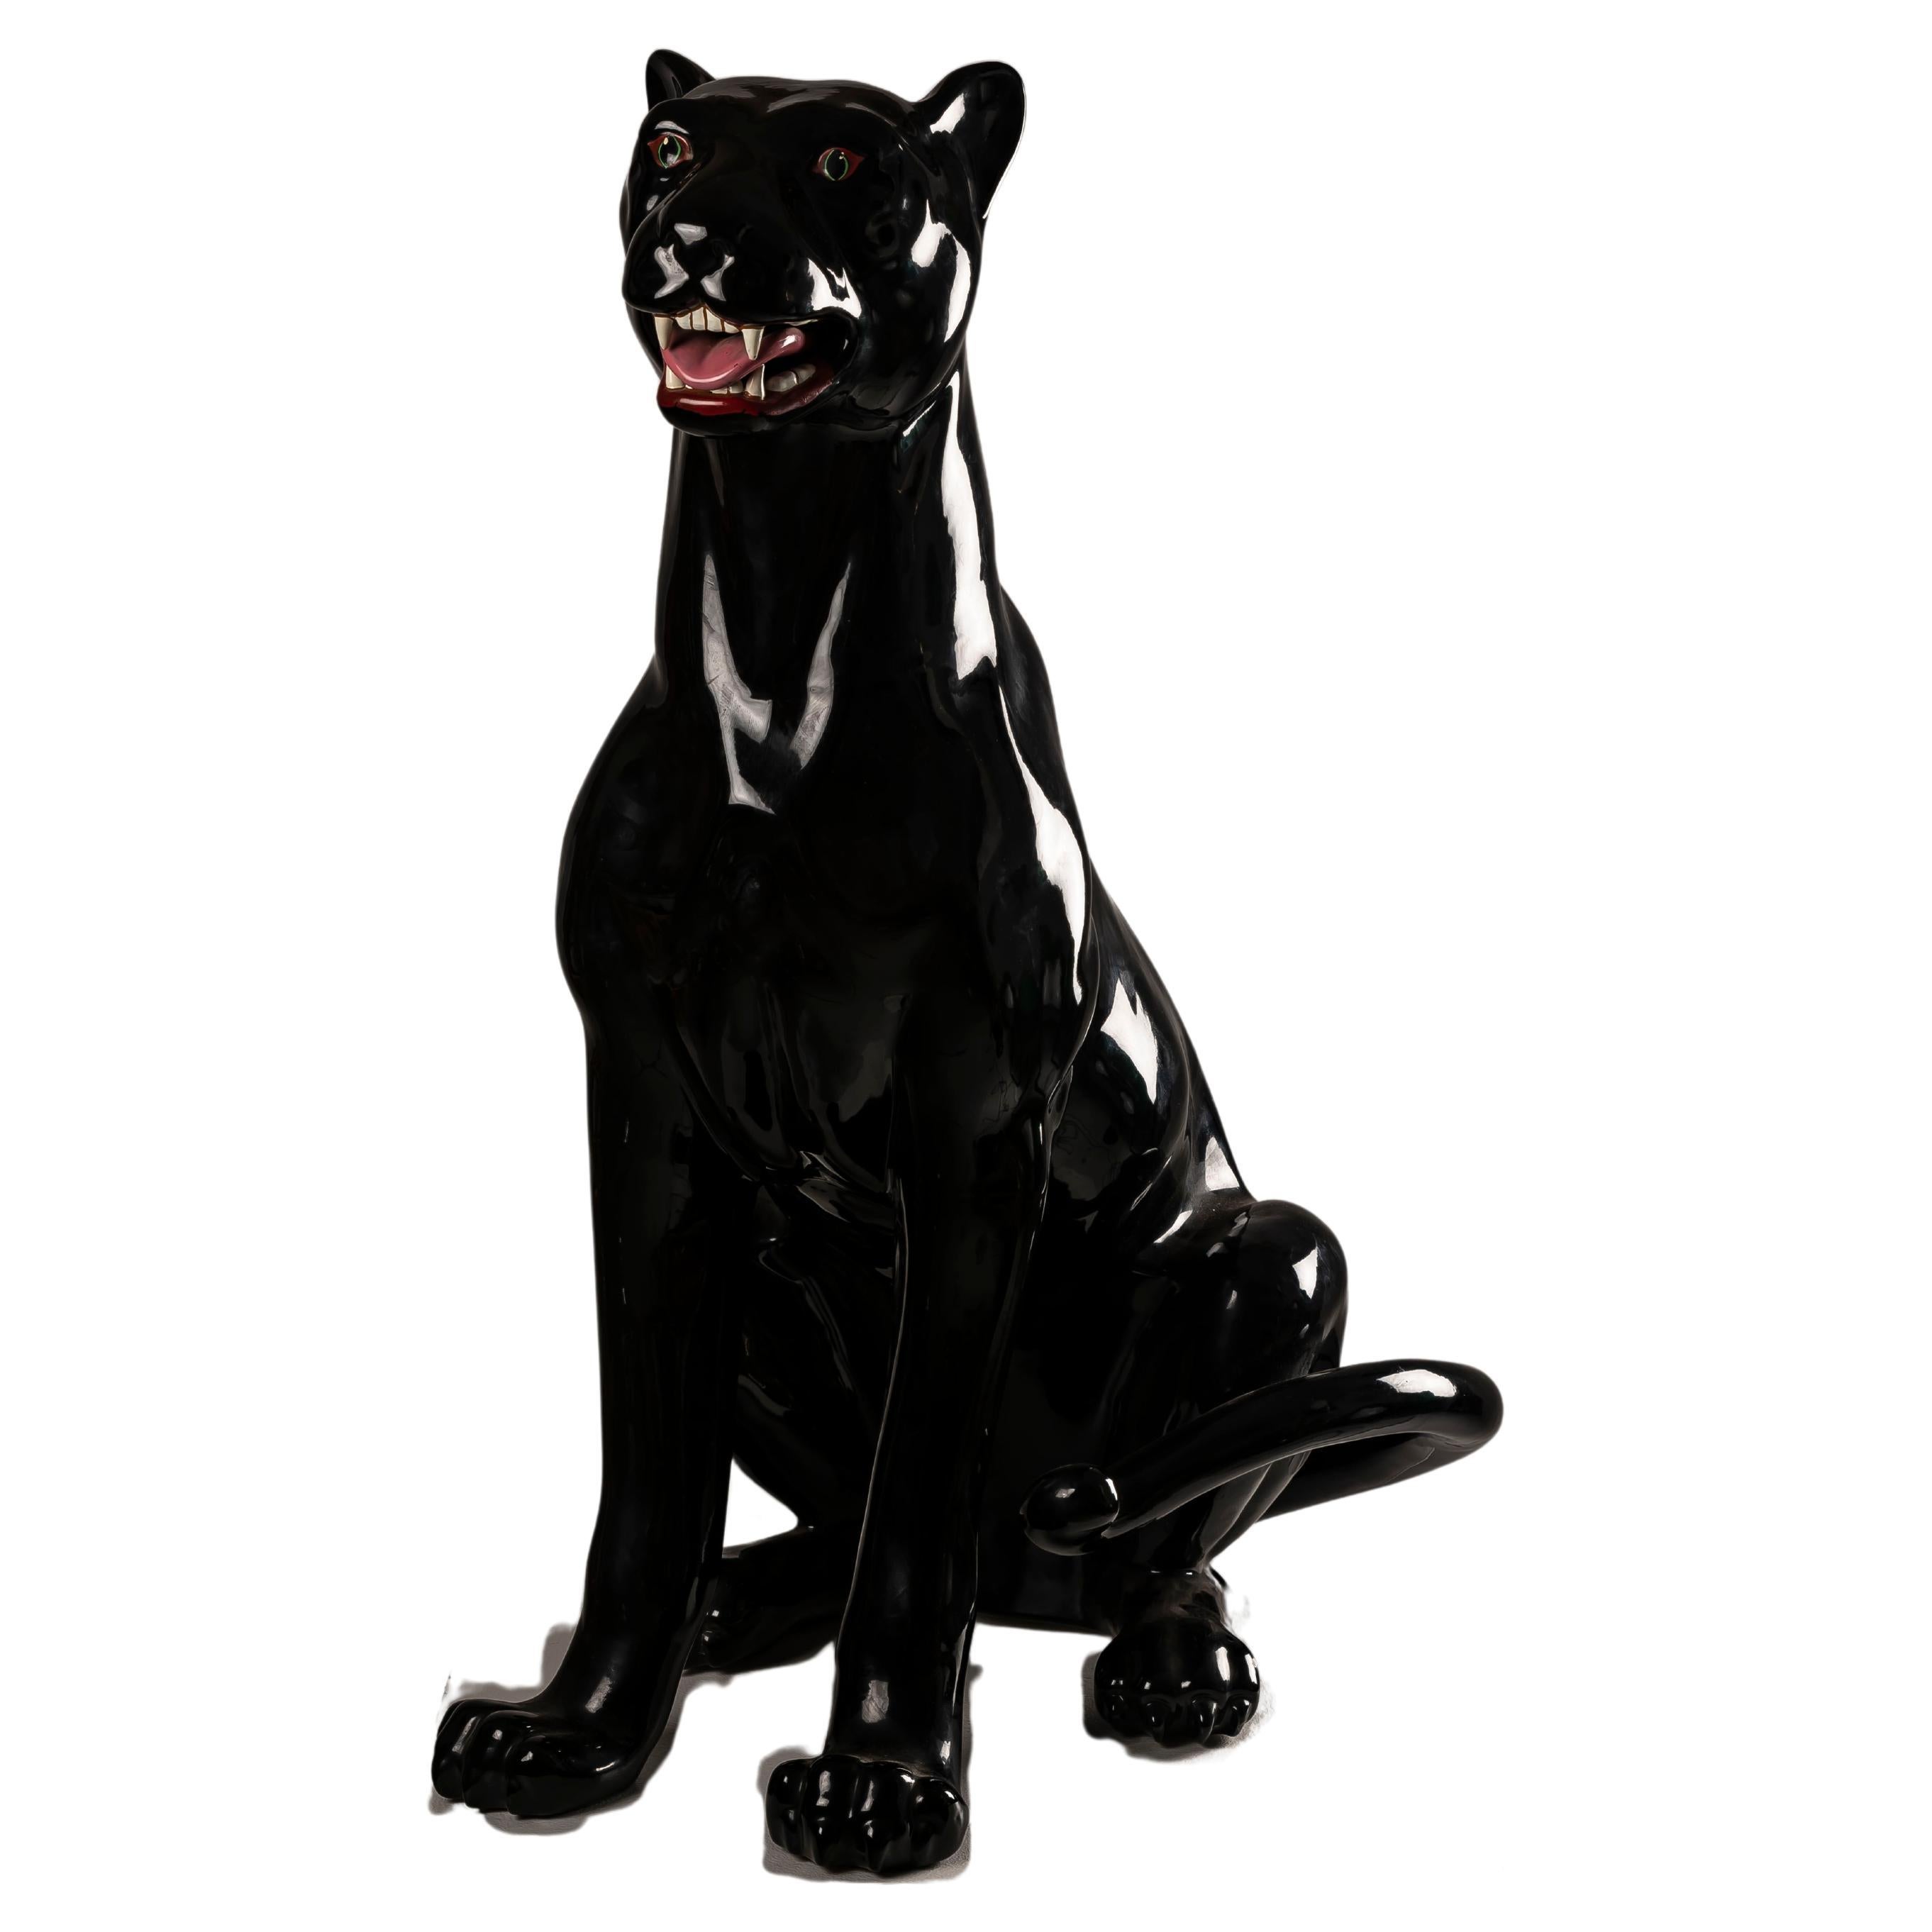 The XXL Black Panther Spanish ceramic BONDIA is more than just a decorative piece; it's a statement of elegance, strength, and cultural significance. Crafted with meticulous attention to detail, this majestic panther statue captures the essence of